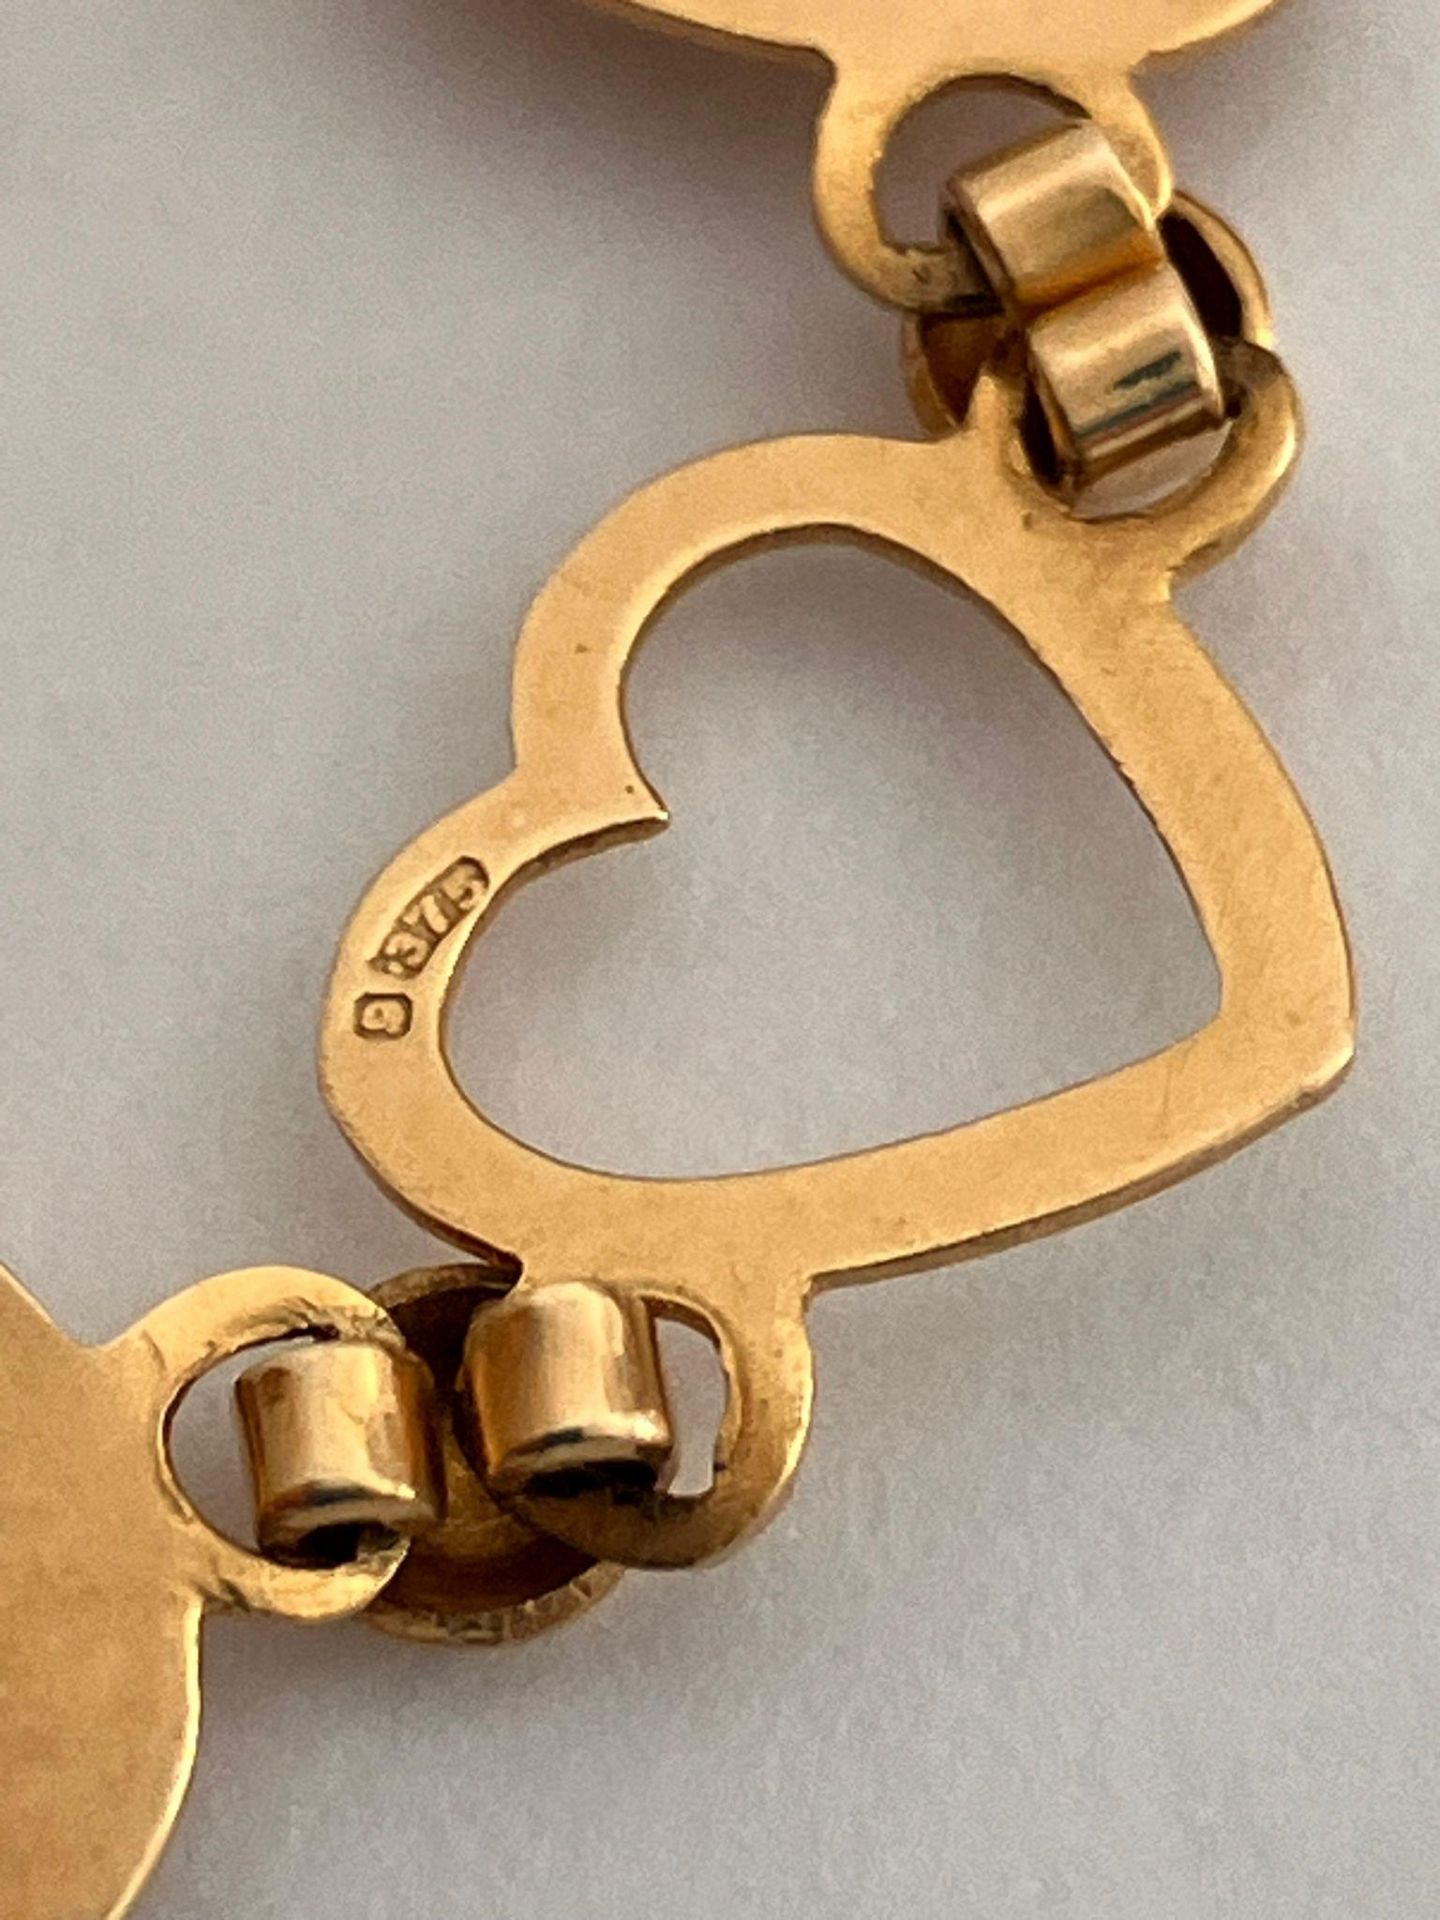 Extremely pretty 9 carat GOLD HEART BRACELET. Complete with gold safety chain. 4.6 grams. 19 cm. - Image 2 of 2